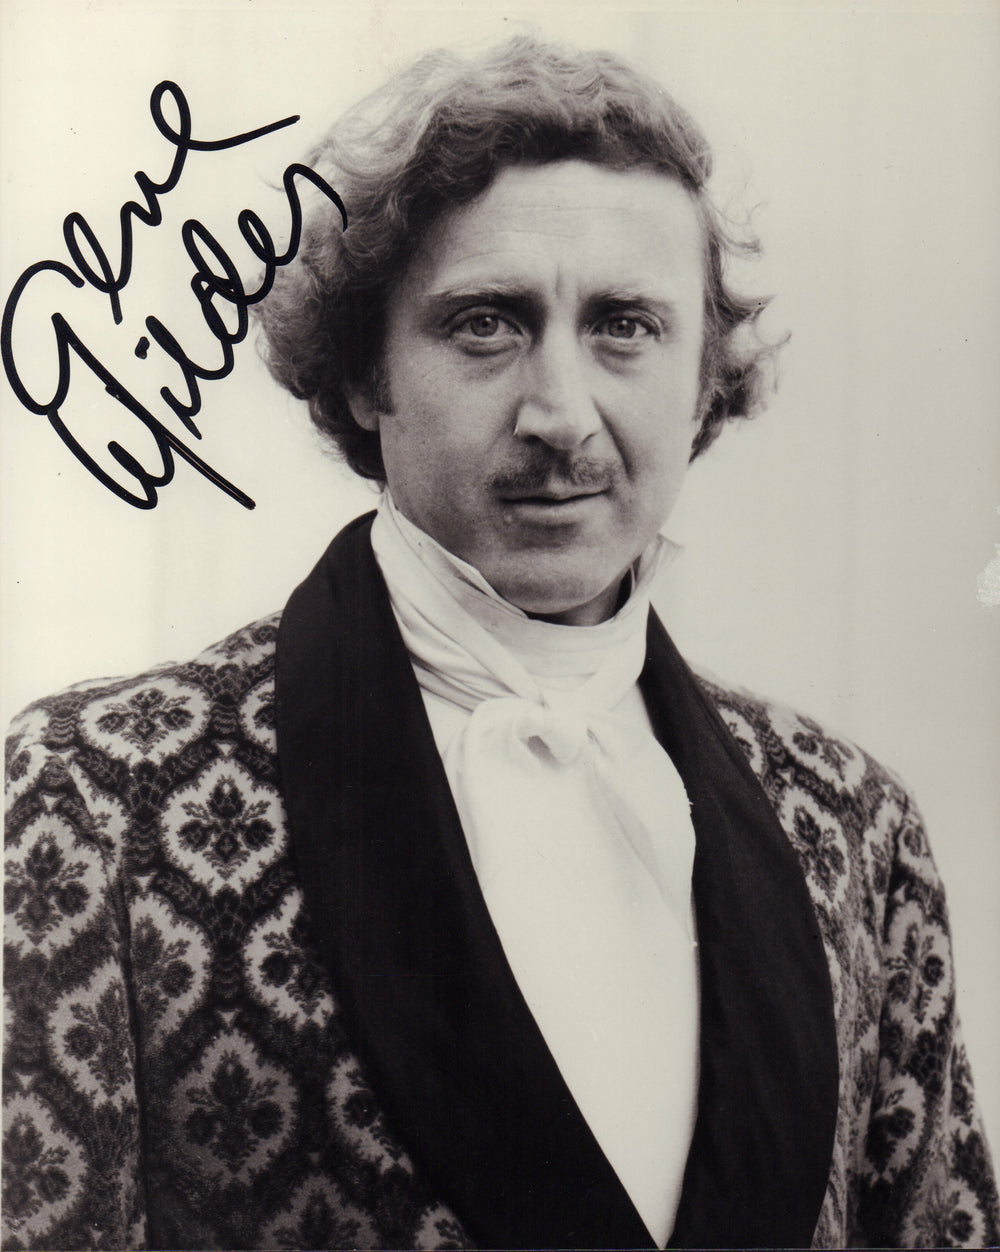 Gene Wilder from Willy Wonka & the Chocolate Factory, The Producers, Blazing Saddles, & Young Frankenstein Signed 8x10 Photo